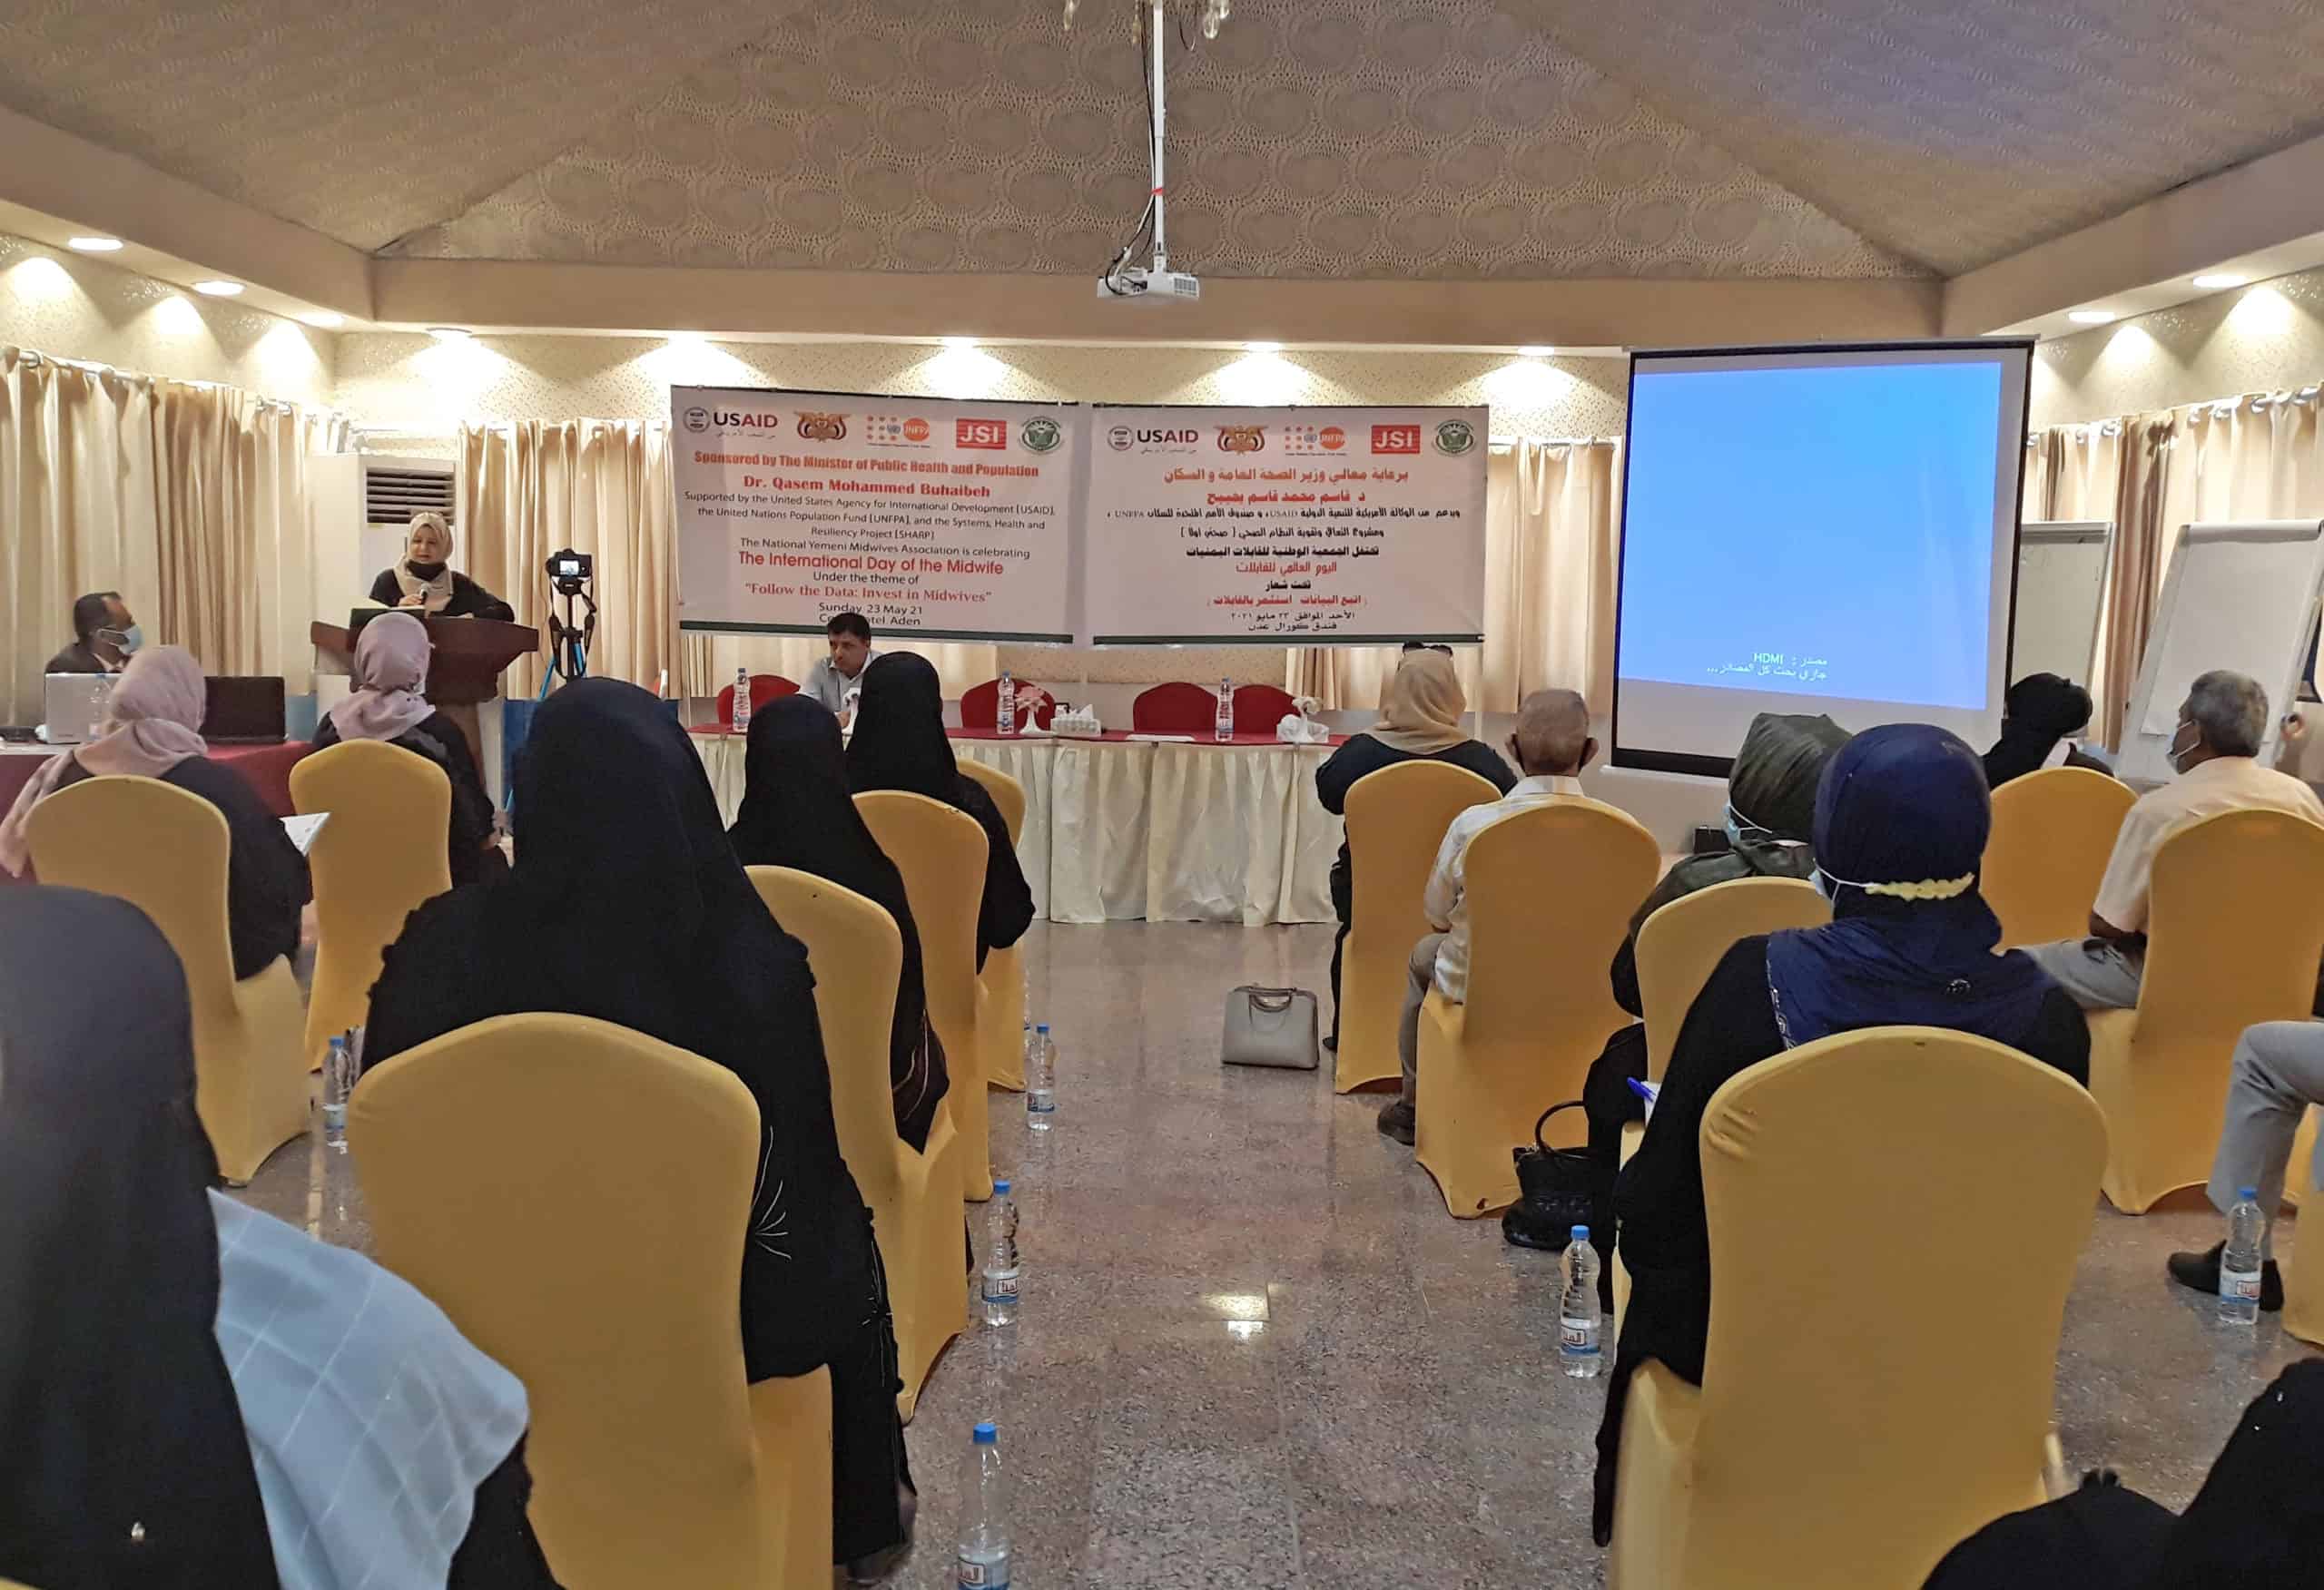 Folks gathered in Yemen to recognize the important role midwives played in the country's resilience to COVID-19.